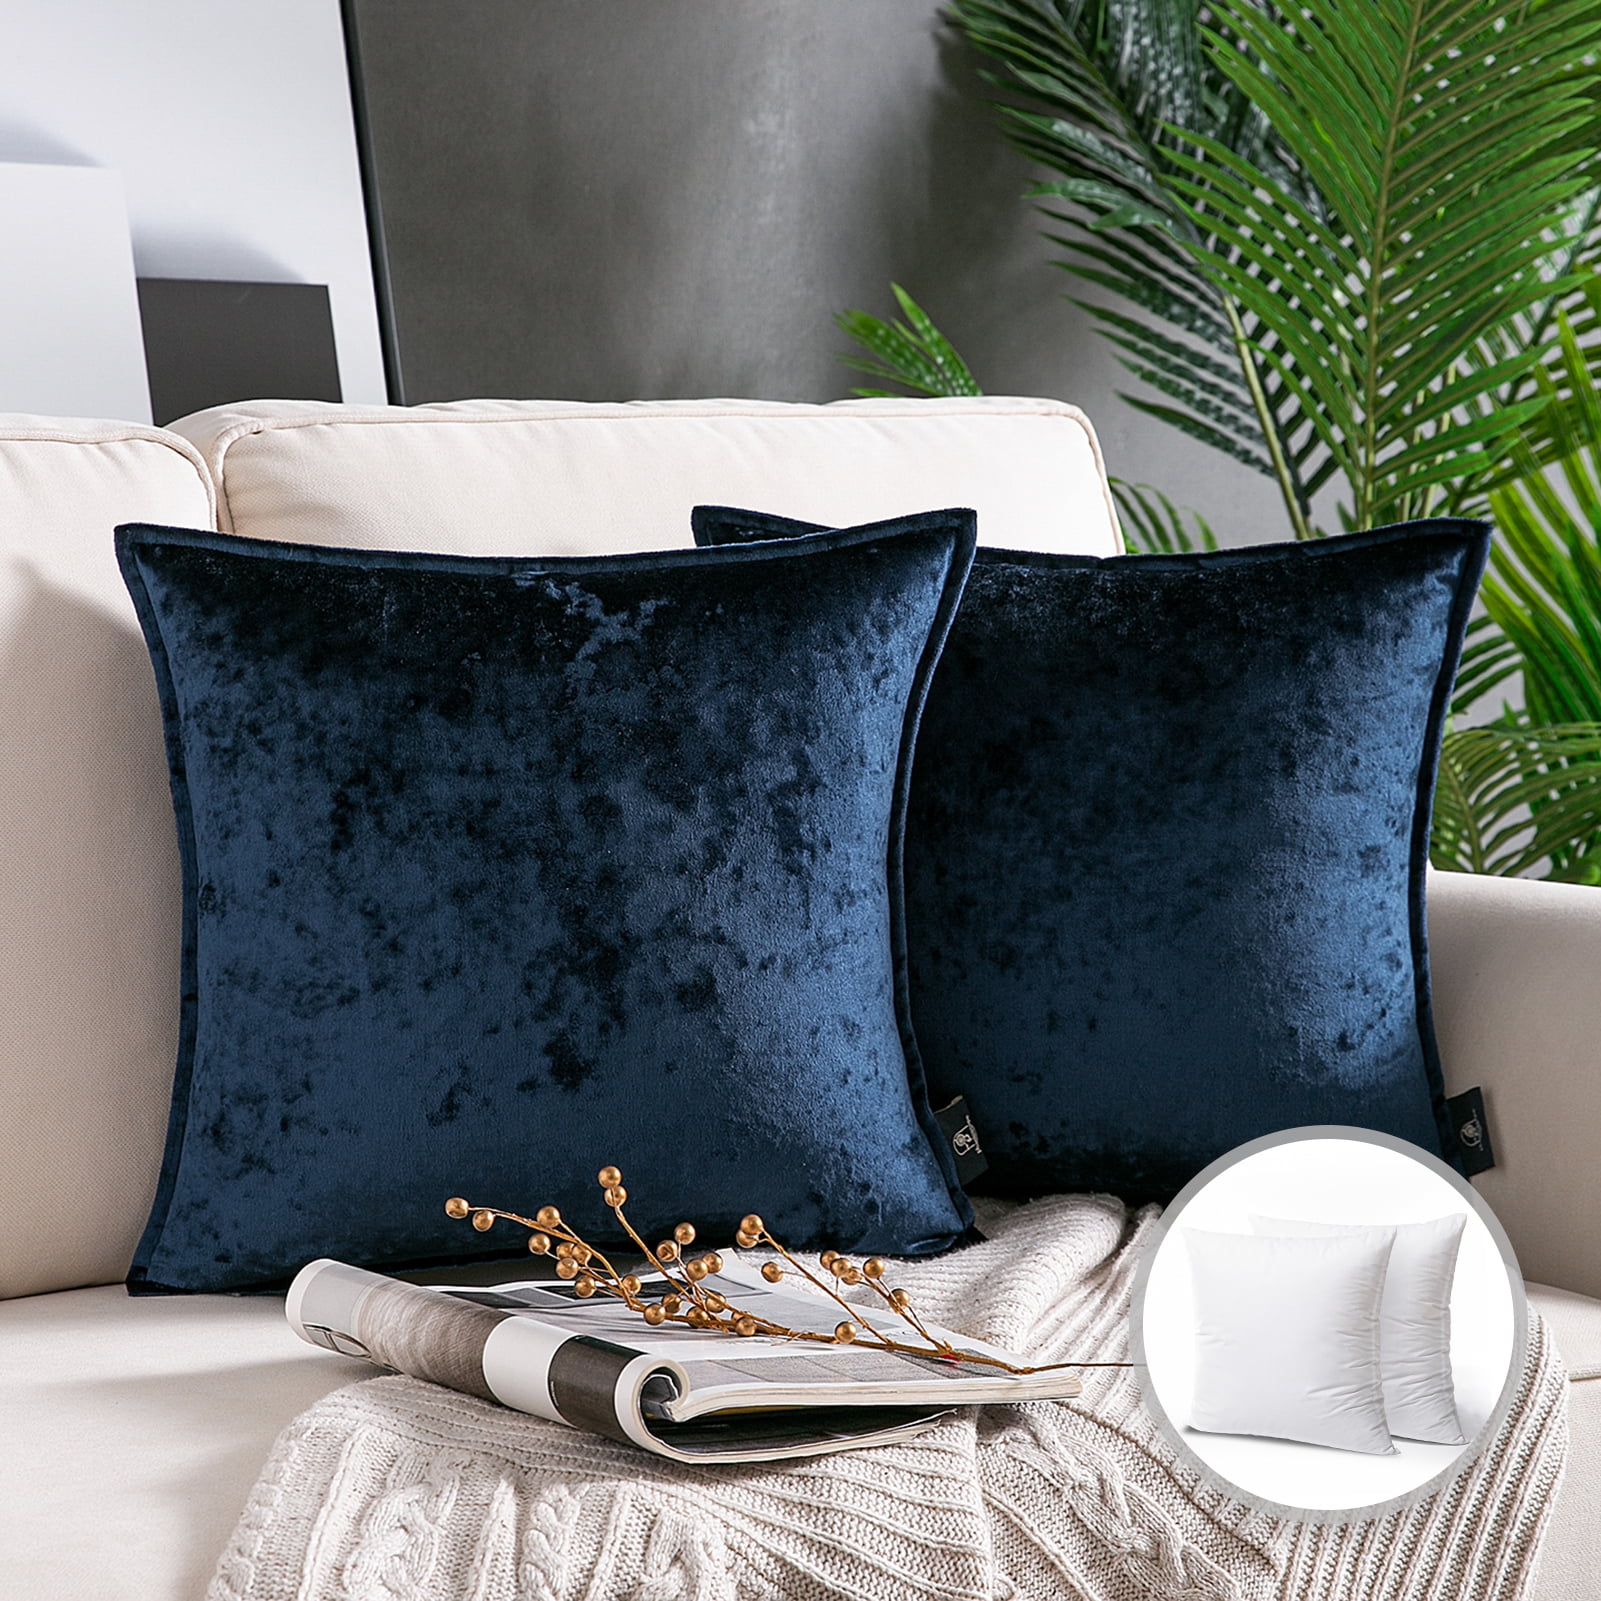 Buy cushions and pillows online from CushionsXpress.